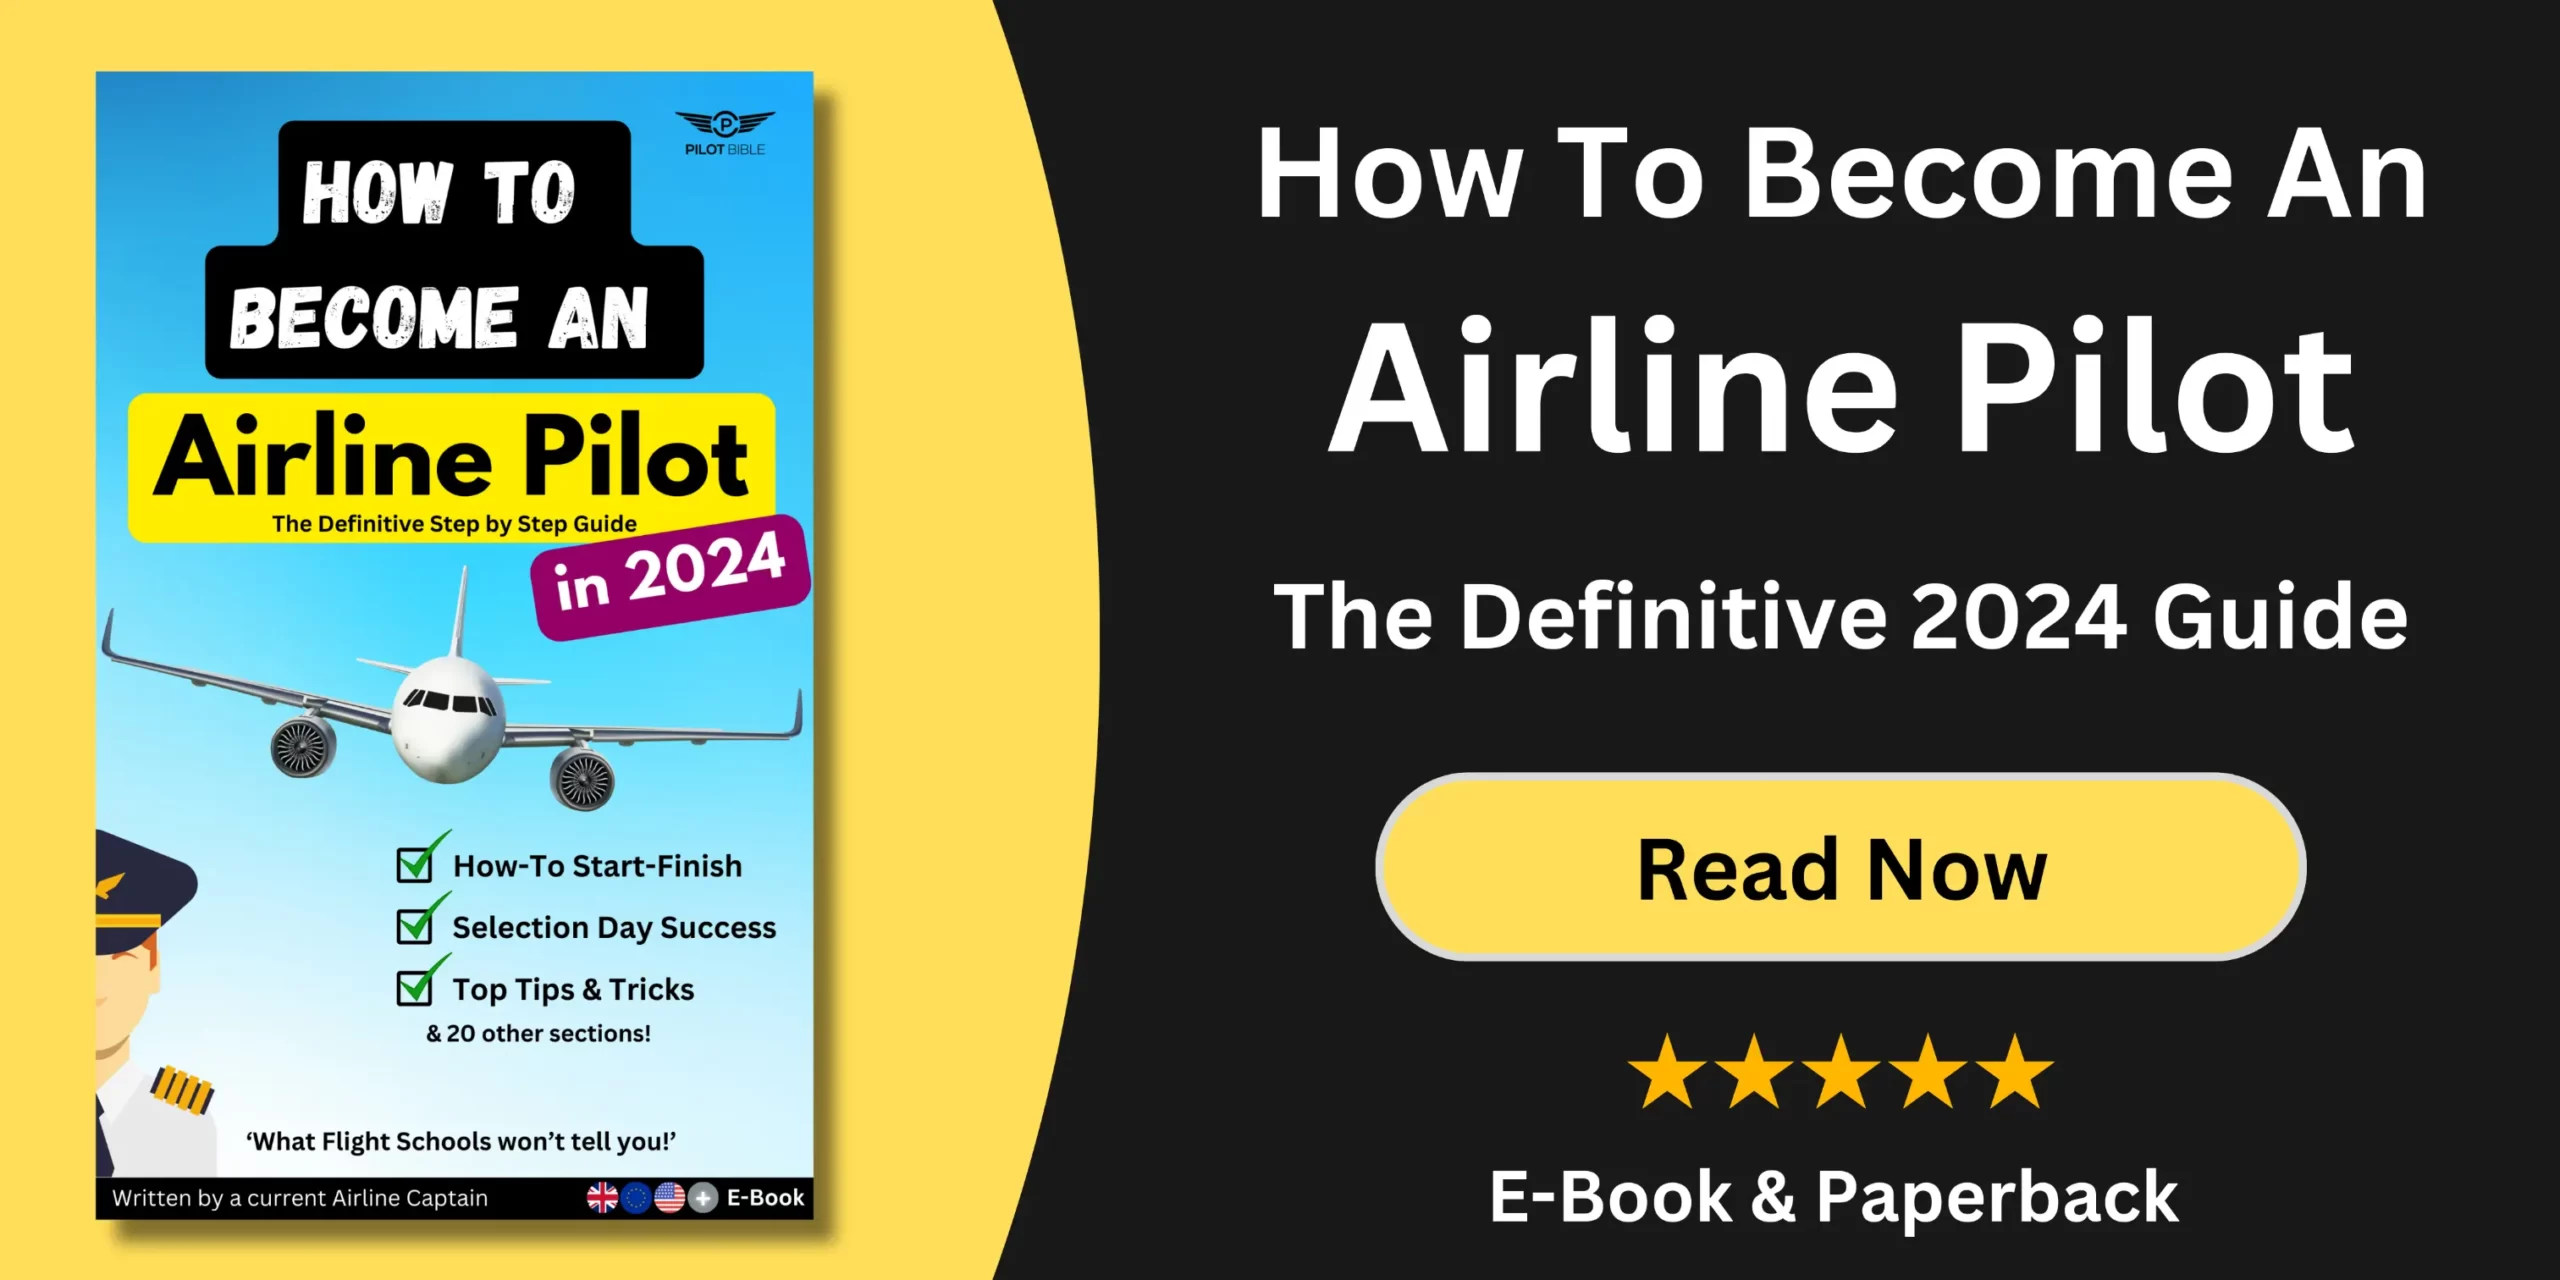 How To Become an Airline Pilot